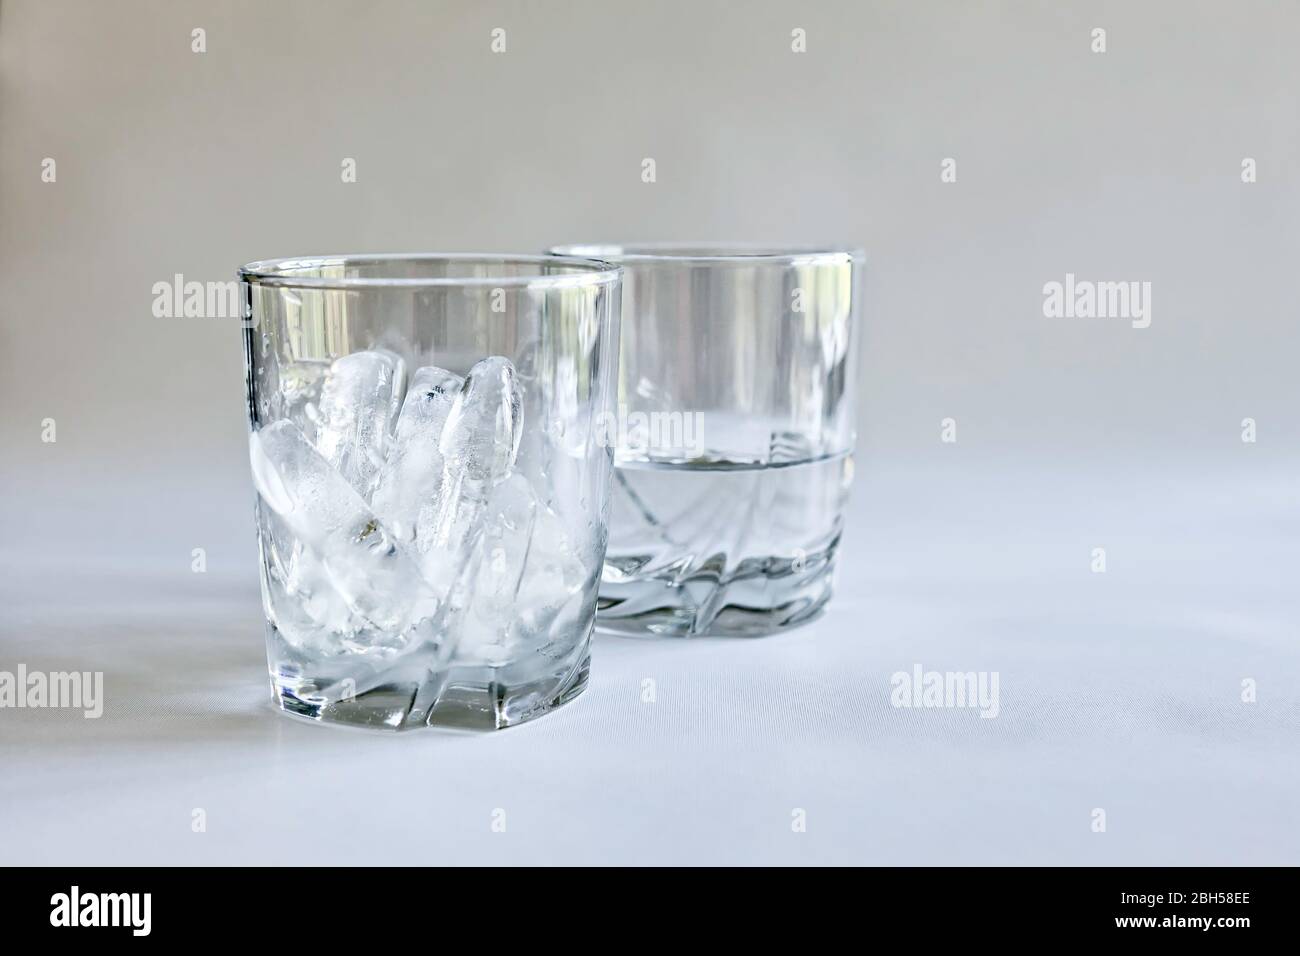 https://c8.alamy.com/comp/2BH58EE/profile-view-of-drinking-glasses-of-ice-and-water-melted-ice-in-transparent-tumblers-on-a-neutral-background-concepts-of-time-and-change-color-2BH58EE.jpg